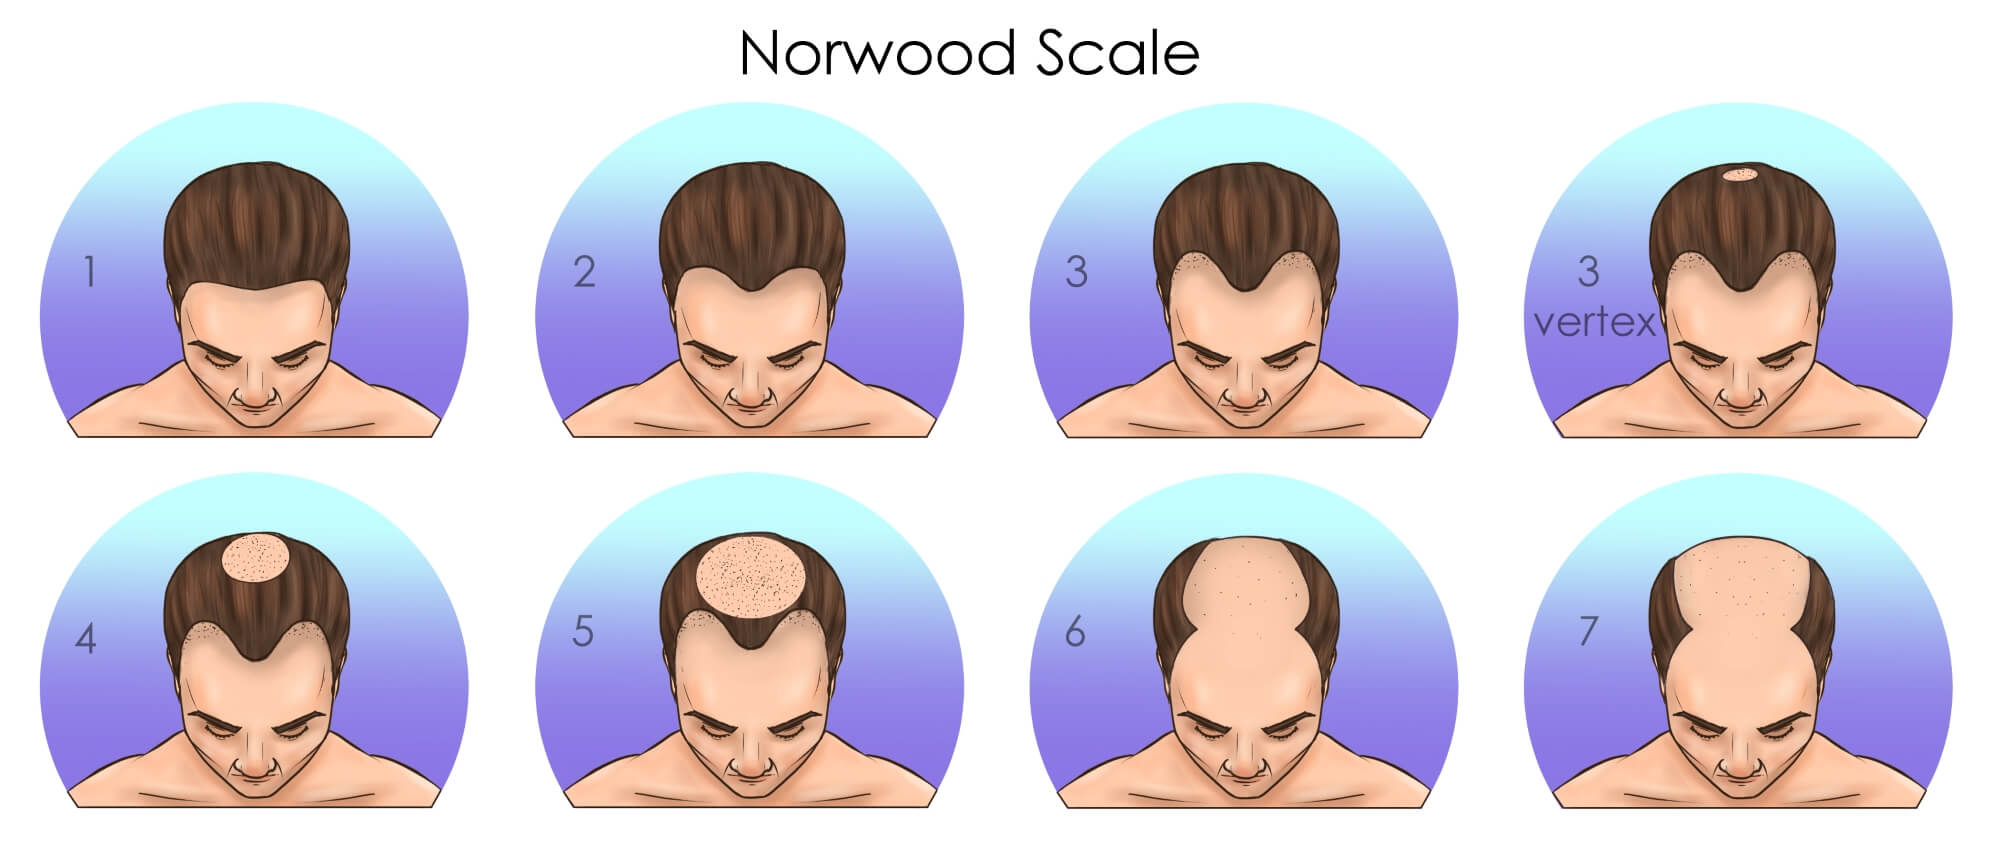 male type hair loss norwood scale